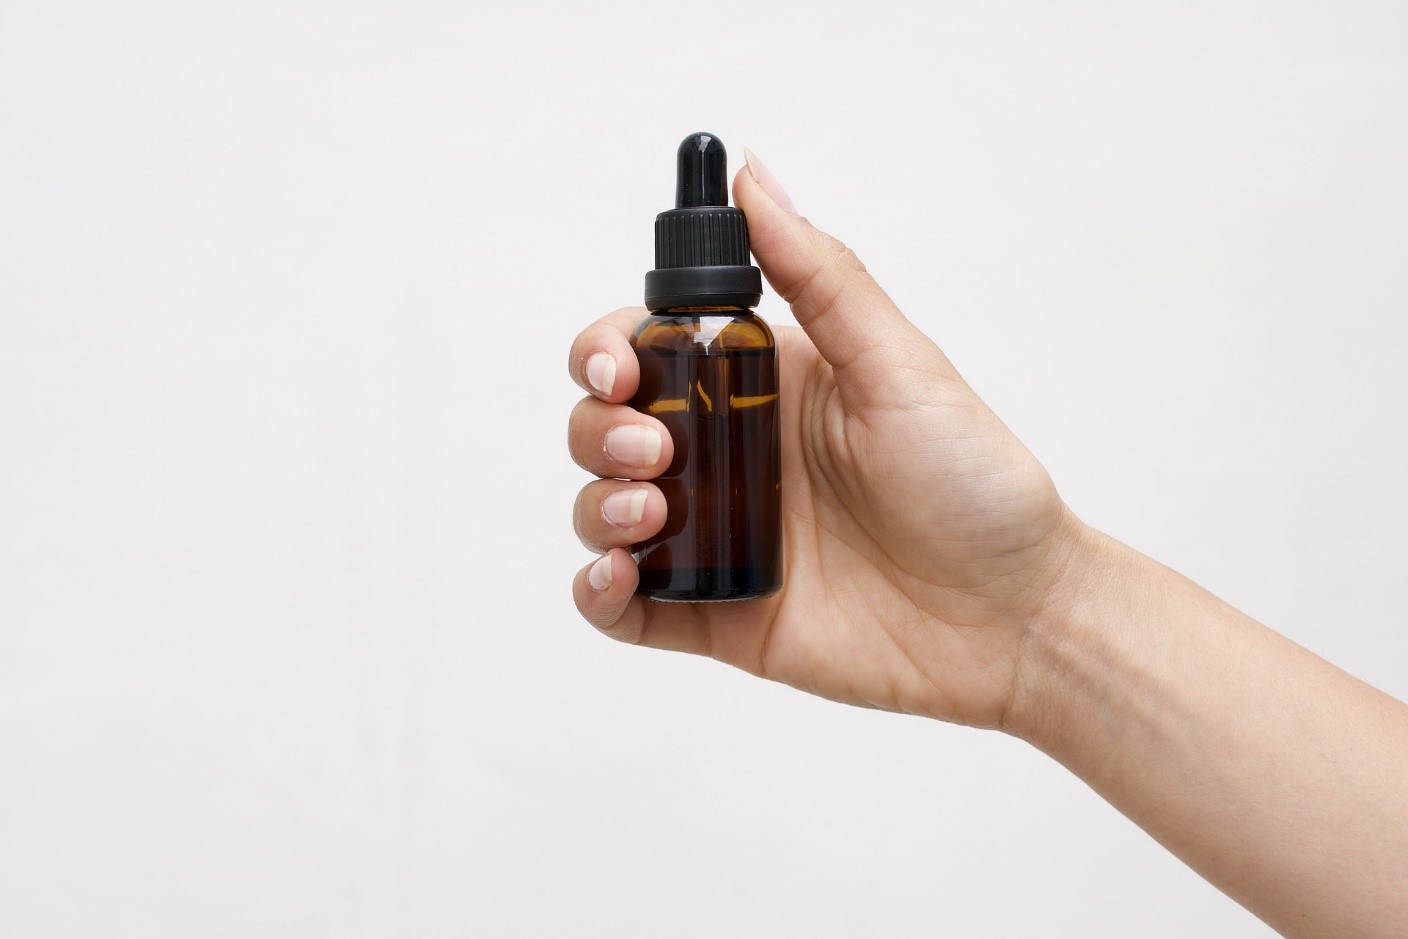 An individual holding a CBD oil bottle.